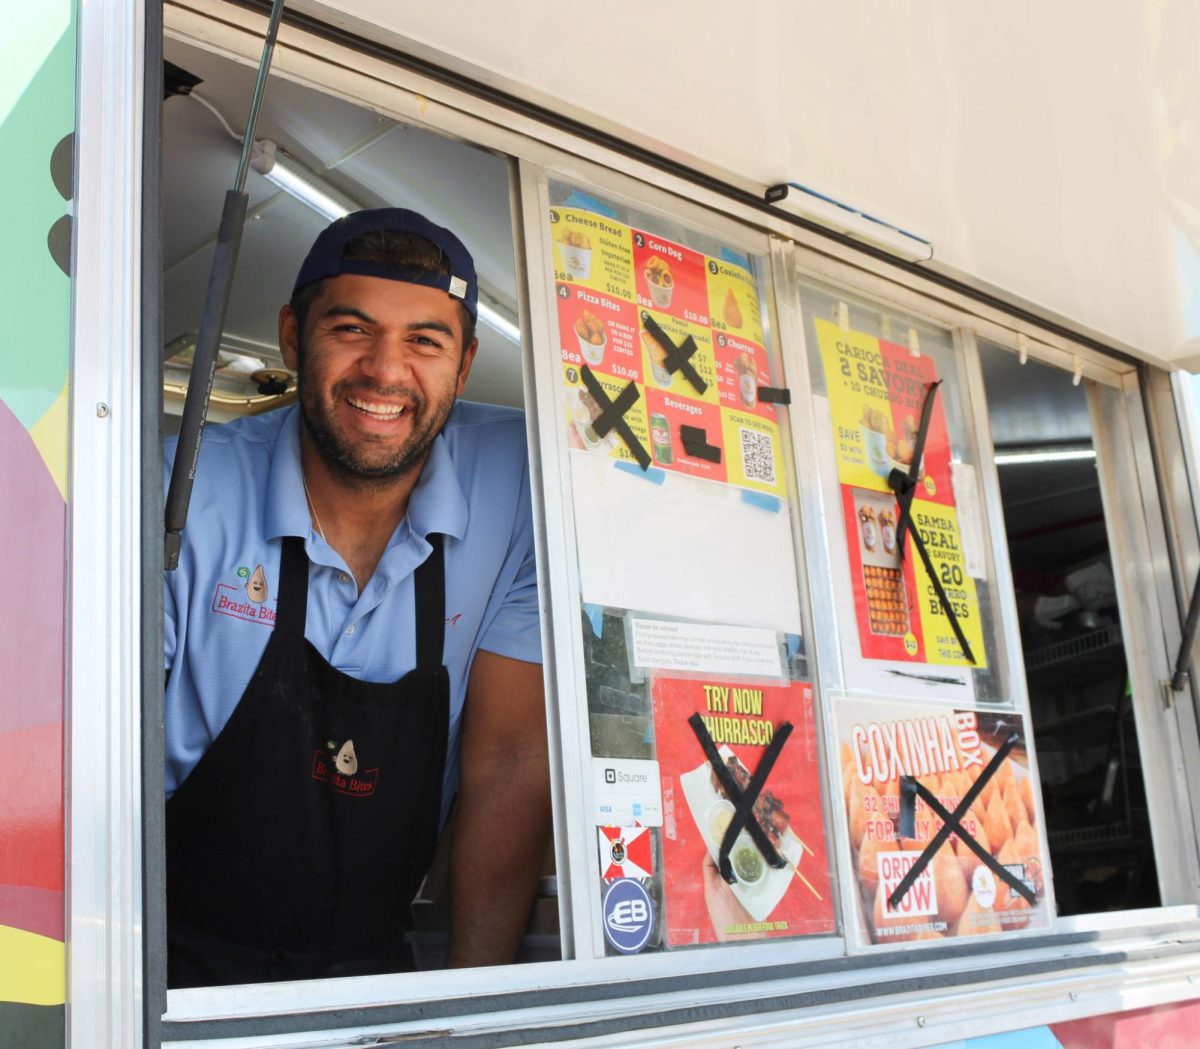 CEO and co-founder Rodrigo Ciriaco pauses to smile while serving authentic Brazilian cuisine at Brazita Bites food truck. Brazita Bites was one of three businesses at SGAS Food Truck Friday on Sept. 8